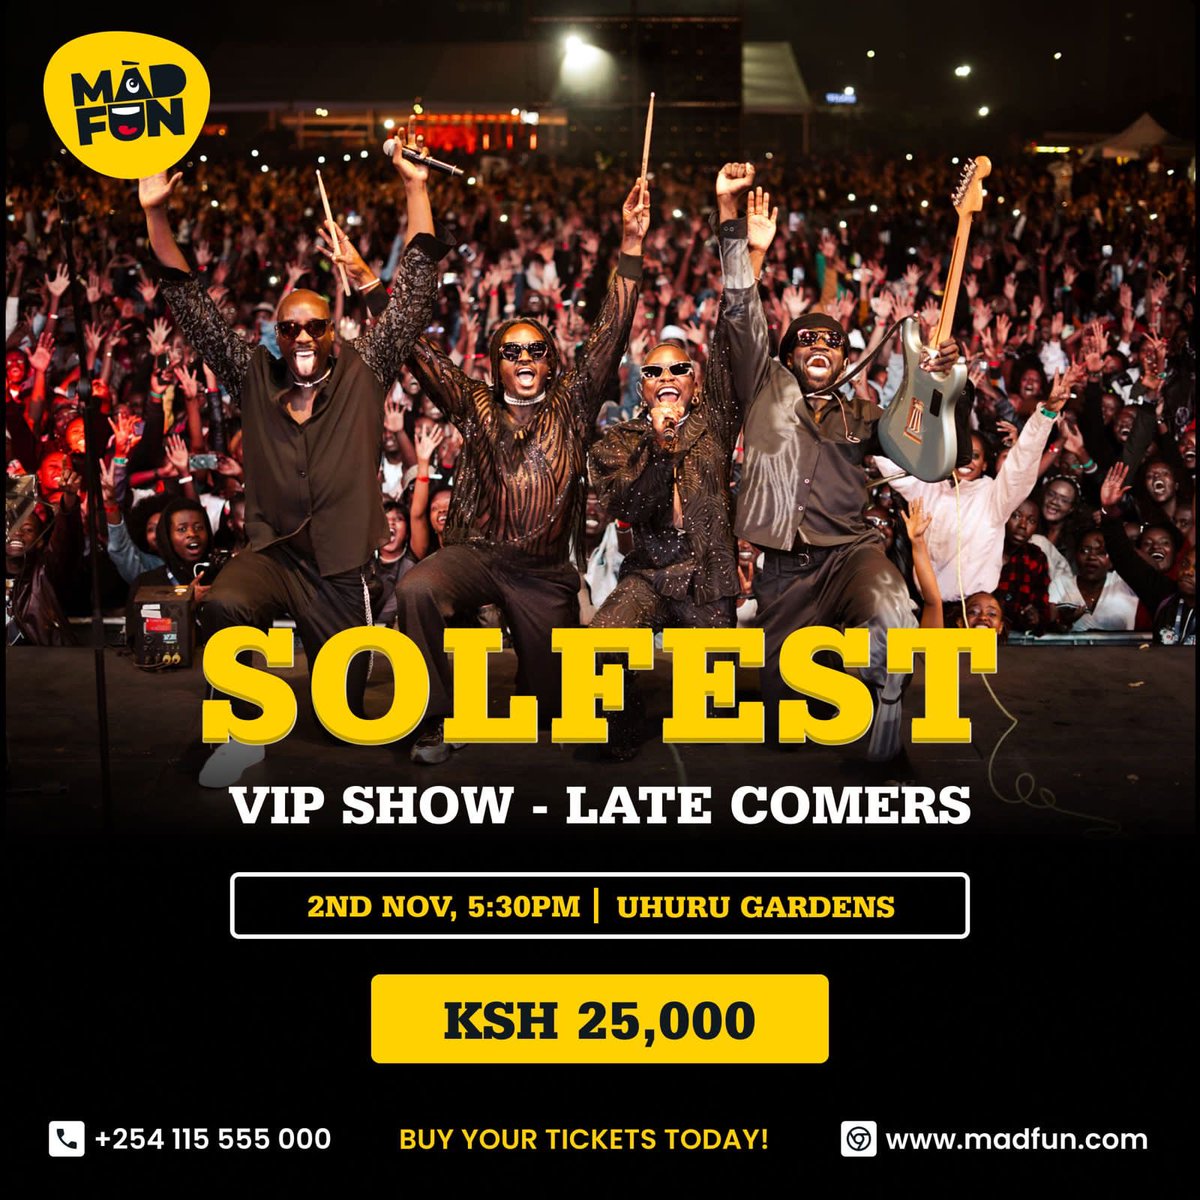 SOLFEST by SAUTI SOL!! Late Comers! Don’t worry! We have a limited stock of SOLFEST VIP tickets!! Visit madfun.com and Grab yours today! Offer ends at 5pm today!